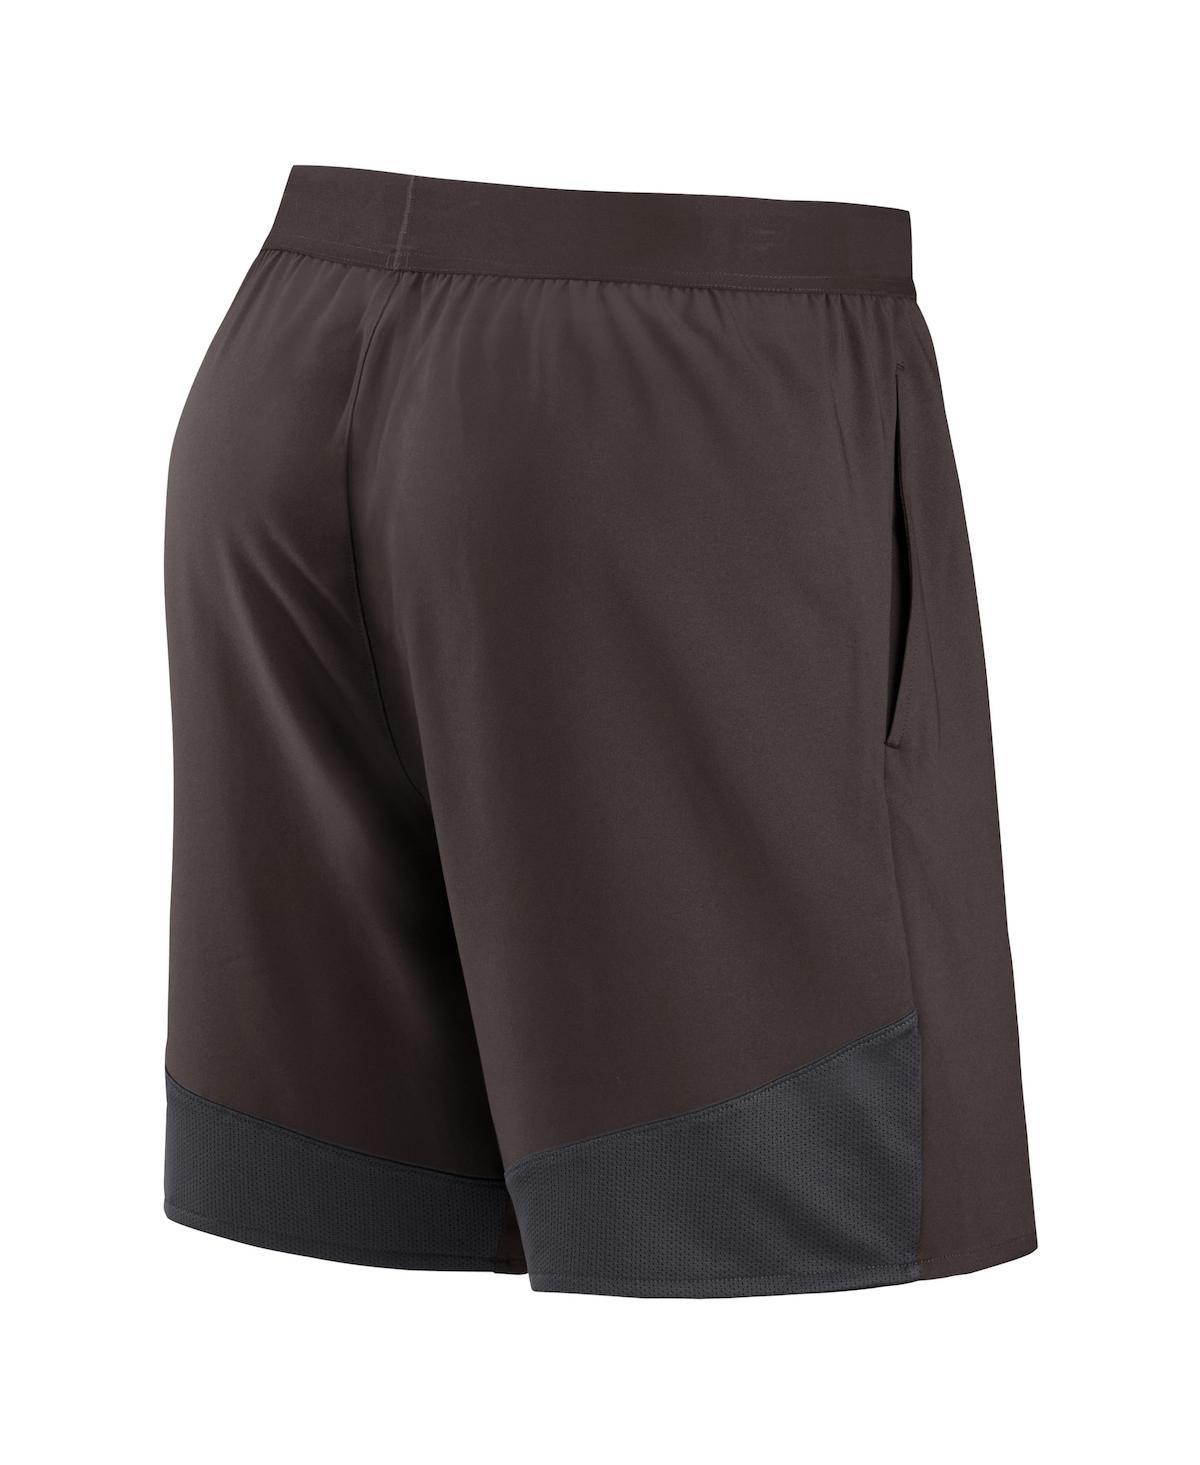 Shop Nike Men's  Brown Cleveland Browns Stretch Performance Shorts